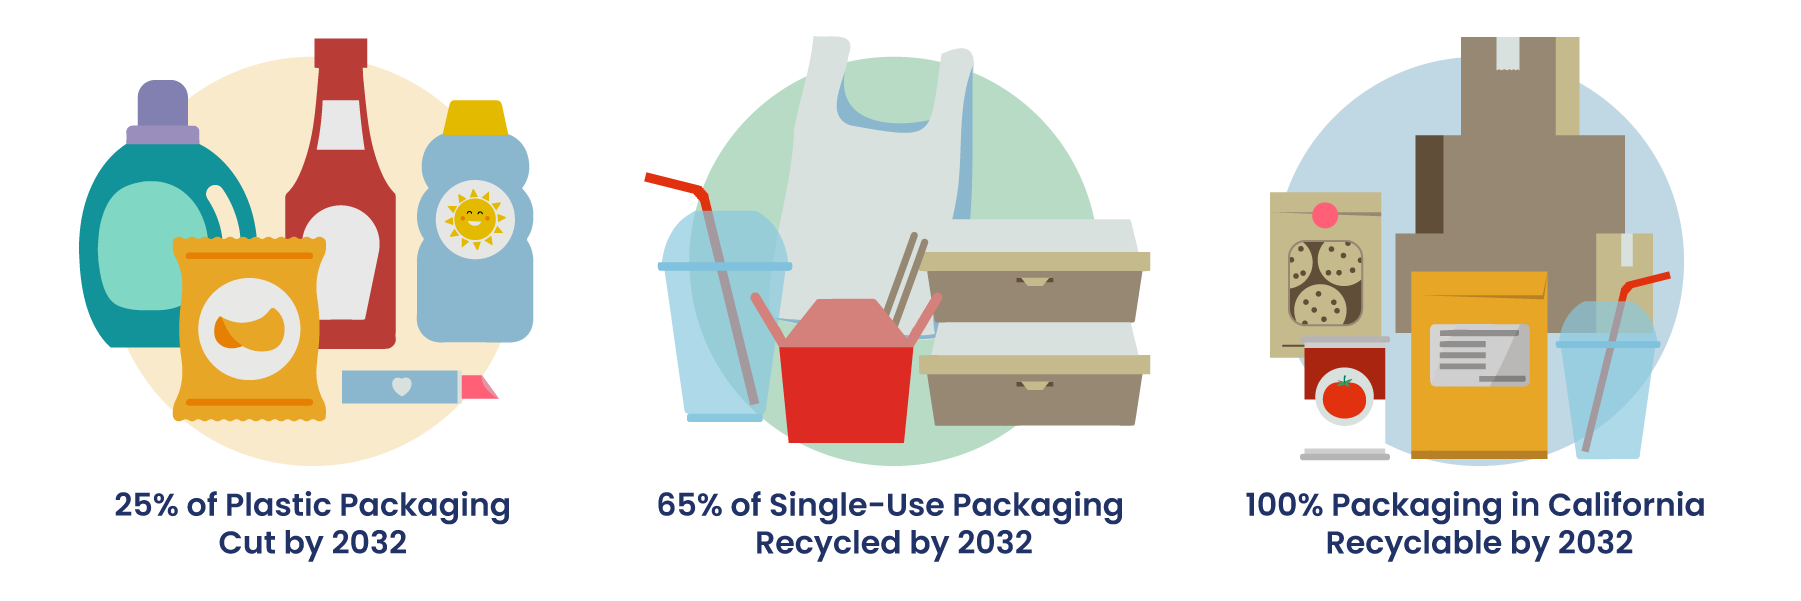 25% of Plastic Packaging Cut by 2032. 65% of Single-Use Packaging Recycled by 2032. 100% Packaging in California Recyclable by 2032.